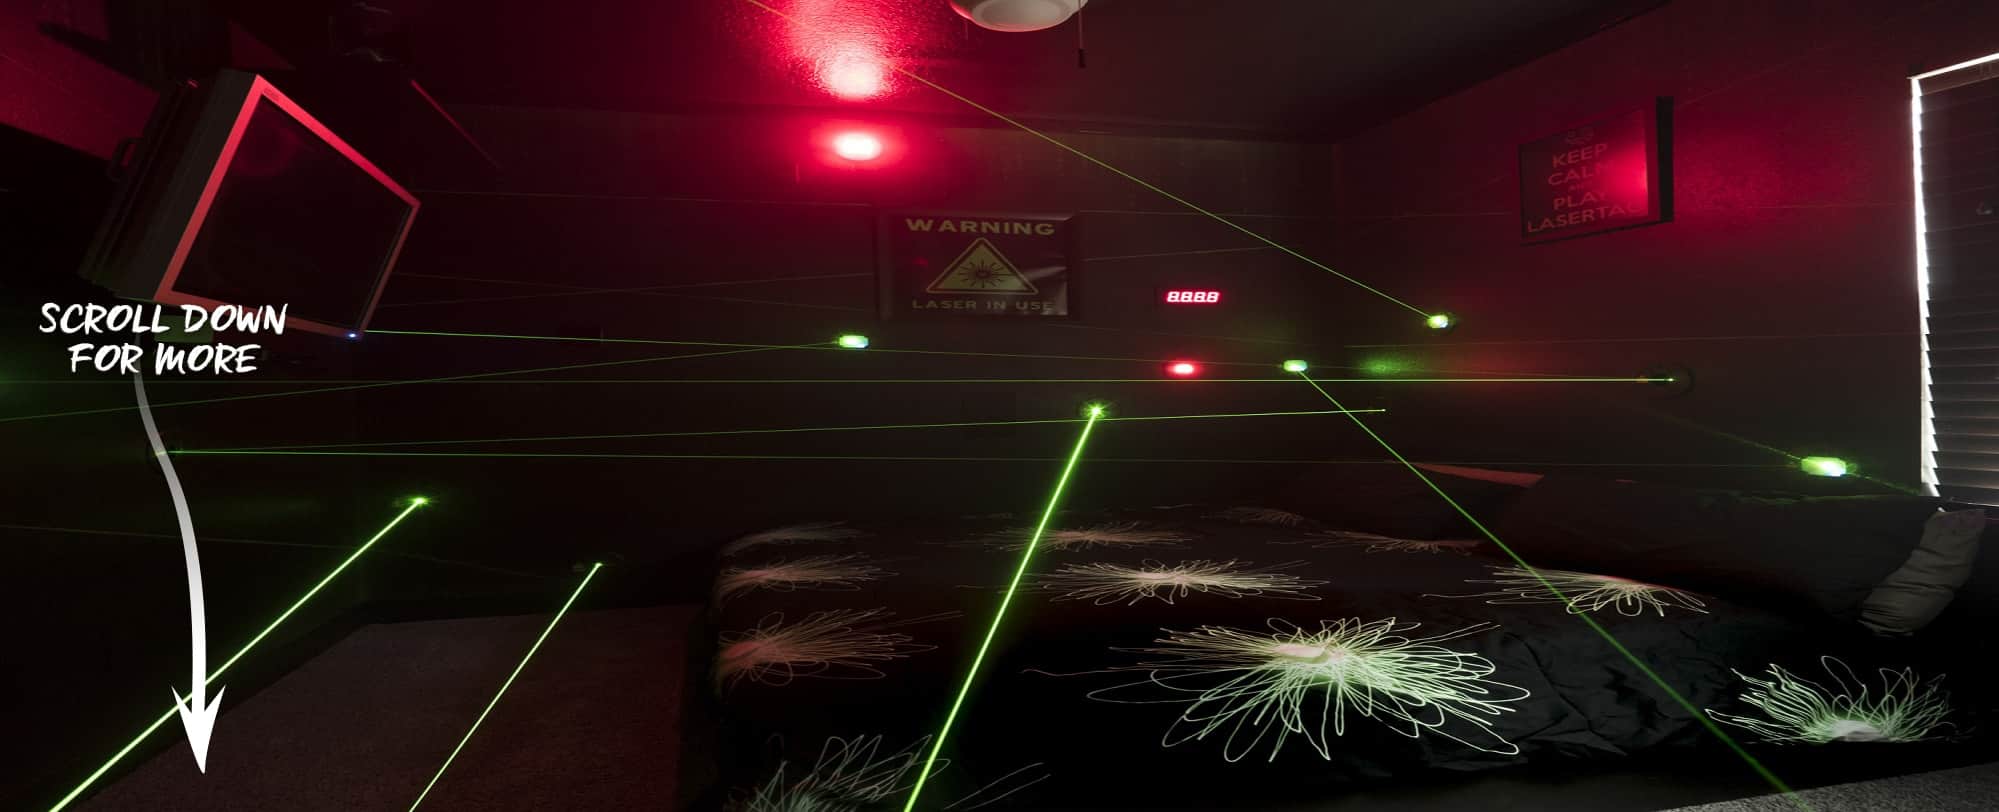 Laser Maze at The Great Escape Lakeside Vacation Home Rental